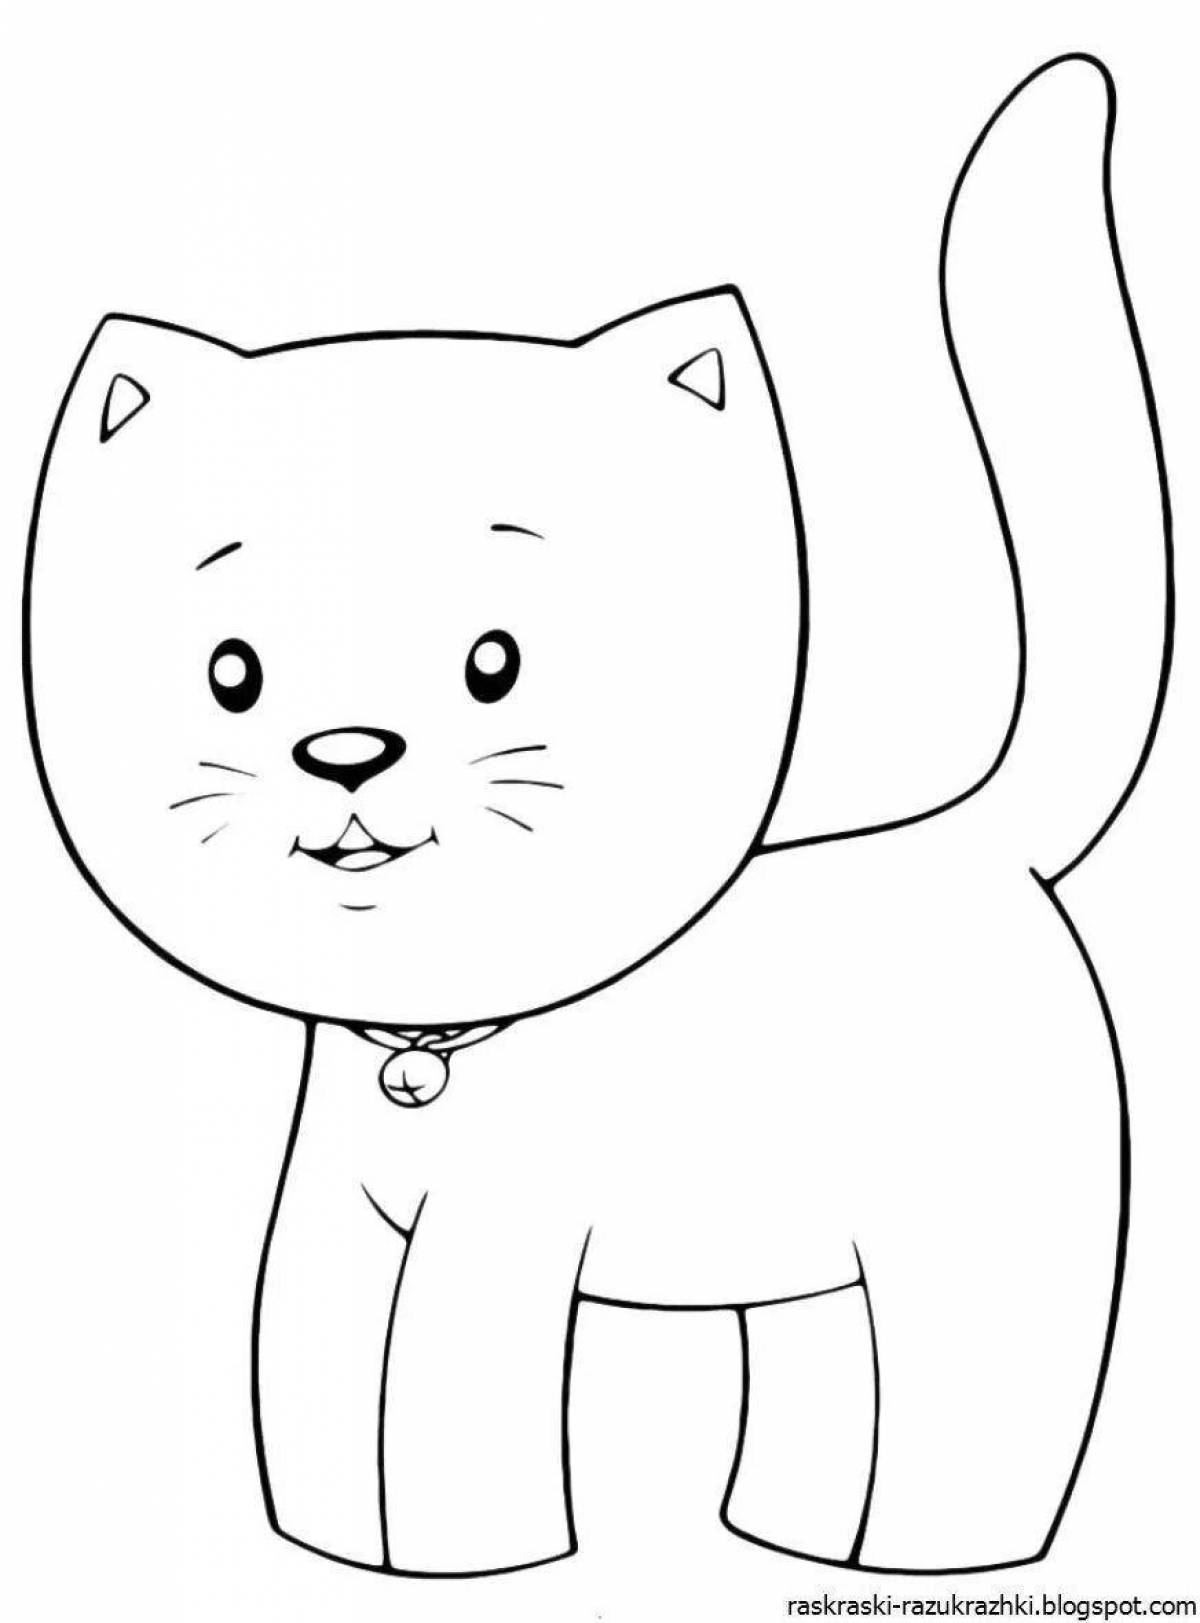 Cute kitty coloring book for 2-3 year olds